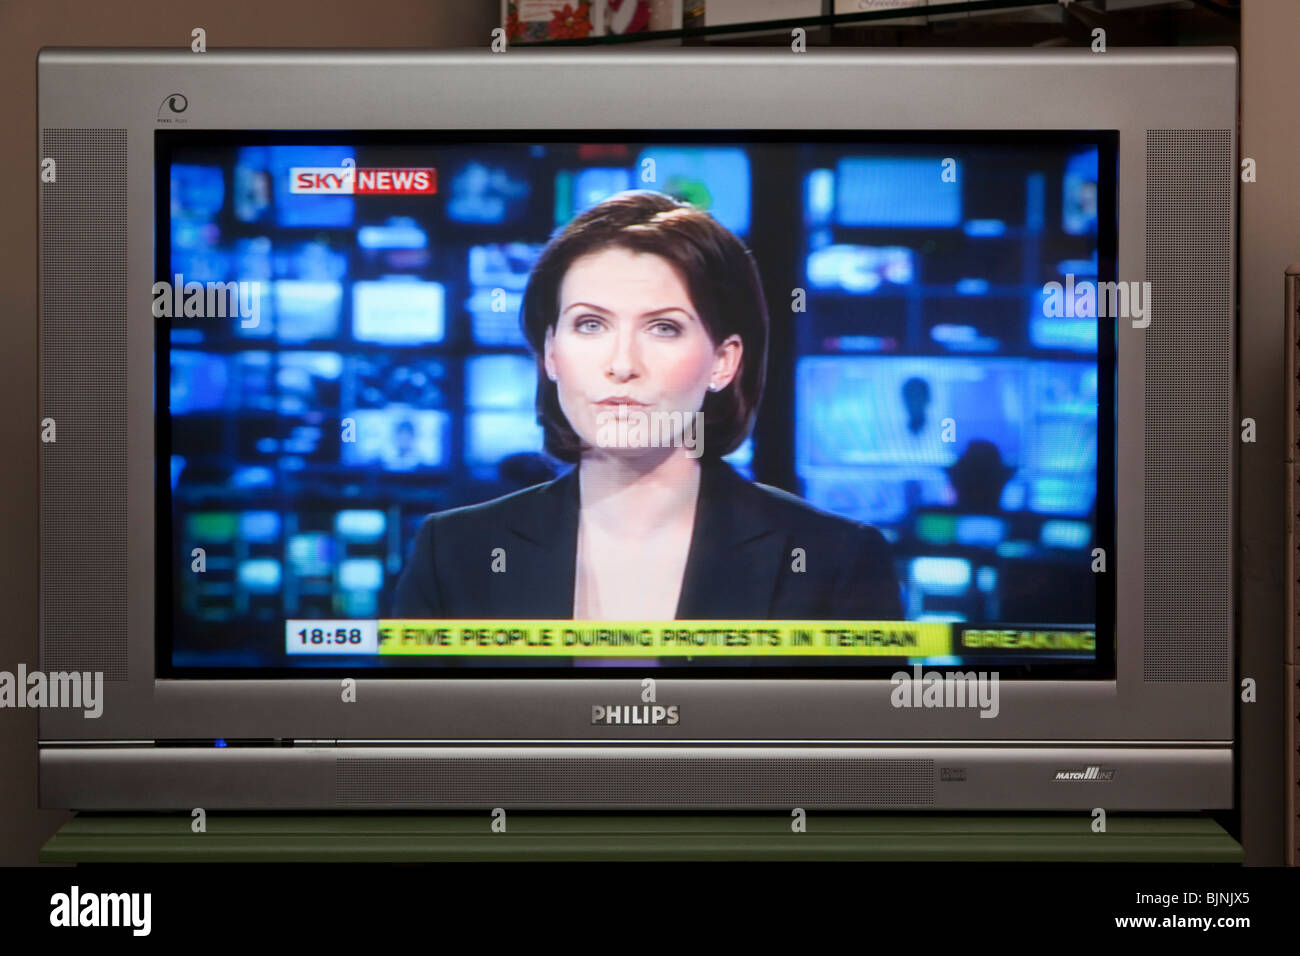 TV screen showing Sky News channel Stock Photo